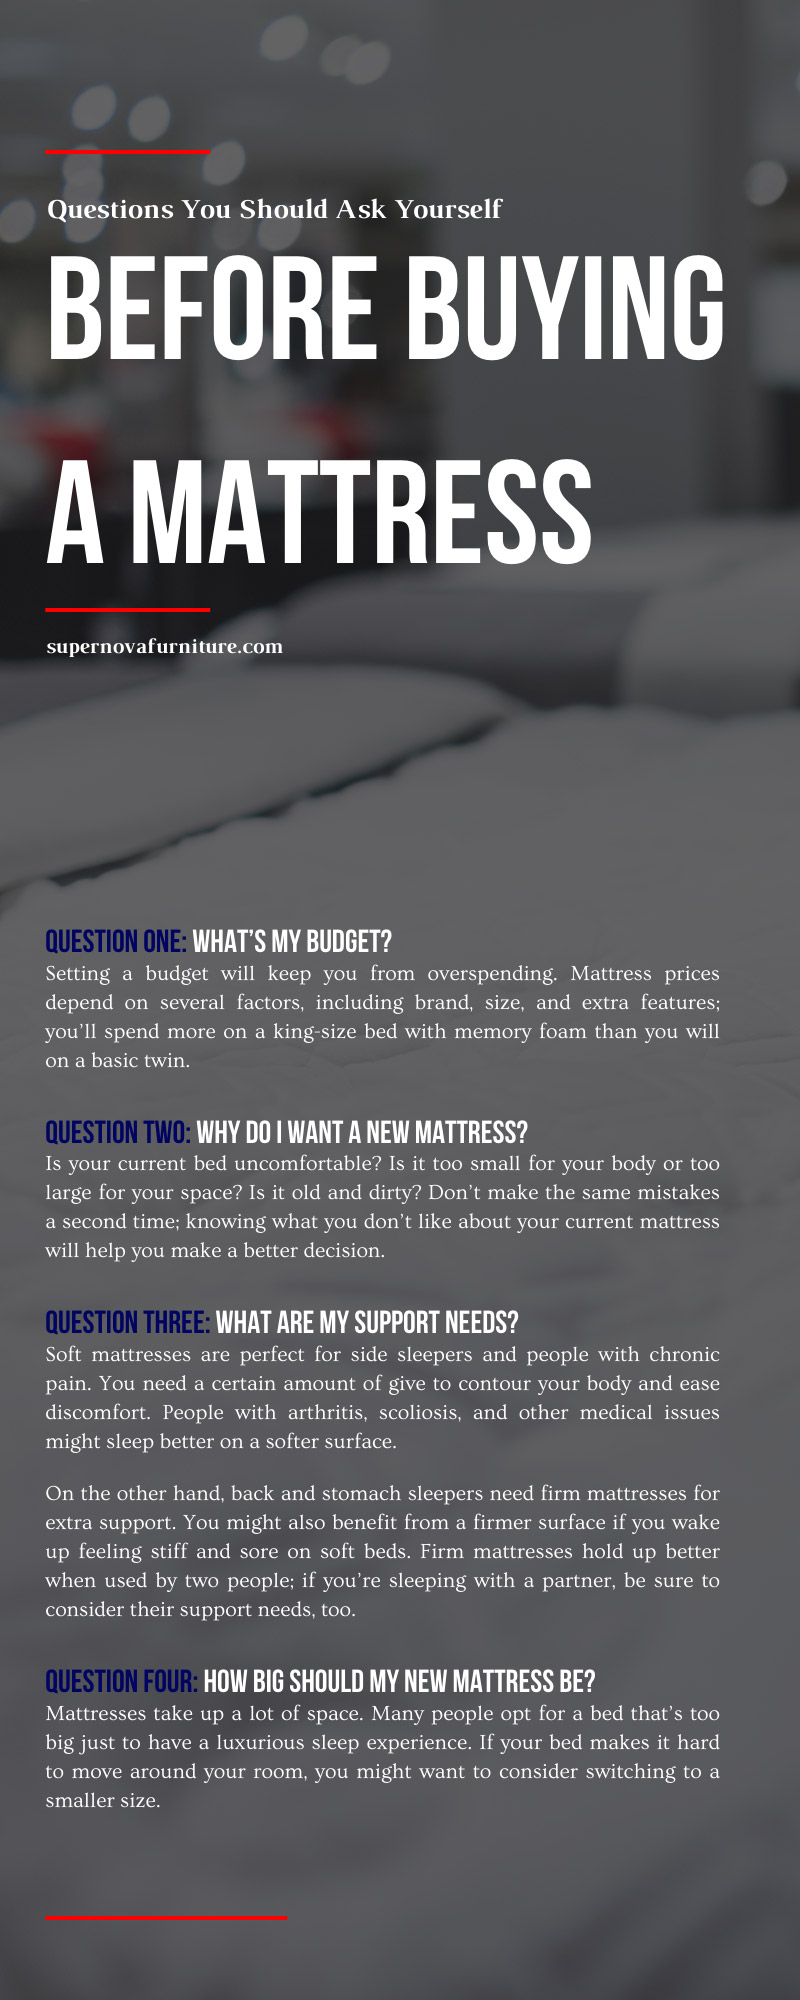 6 Questions You Should Ask Yourself Before Buying a Mattress